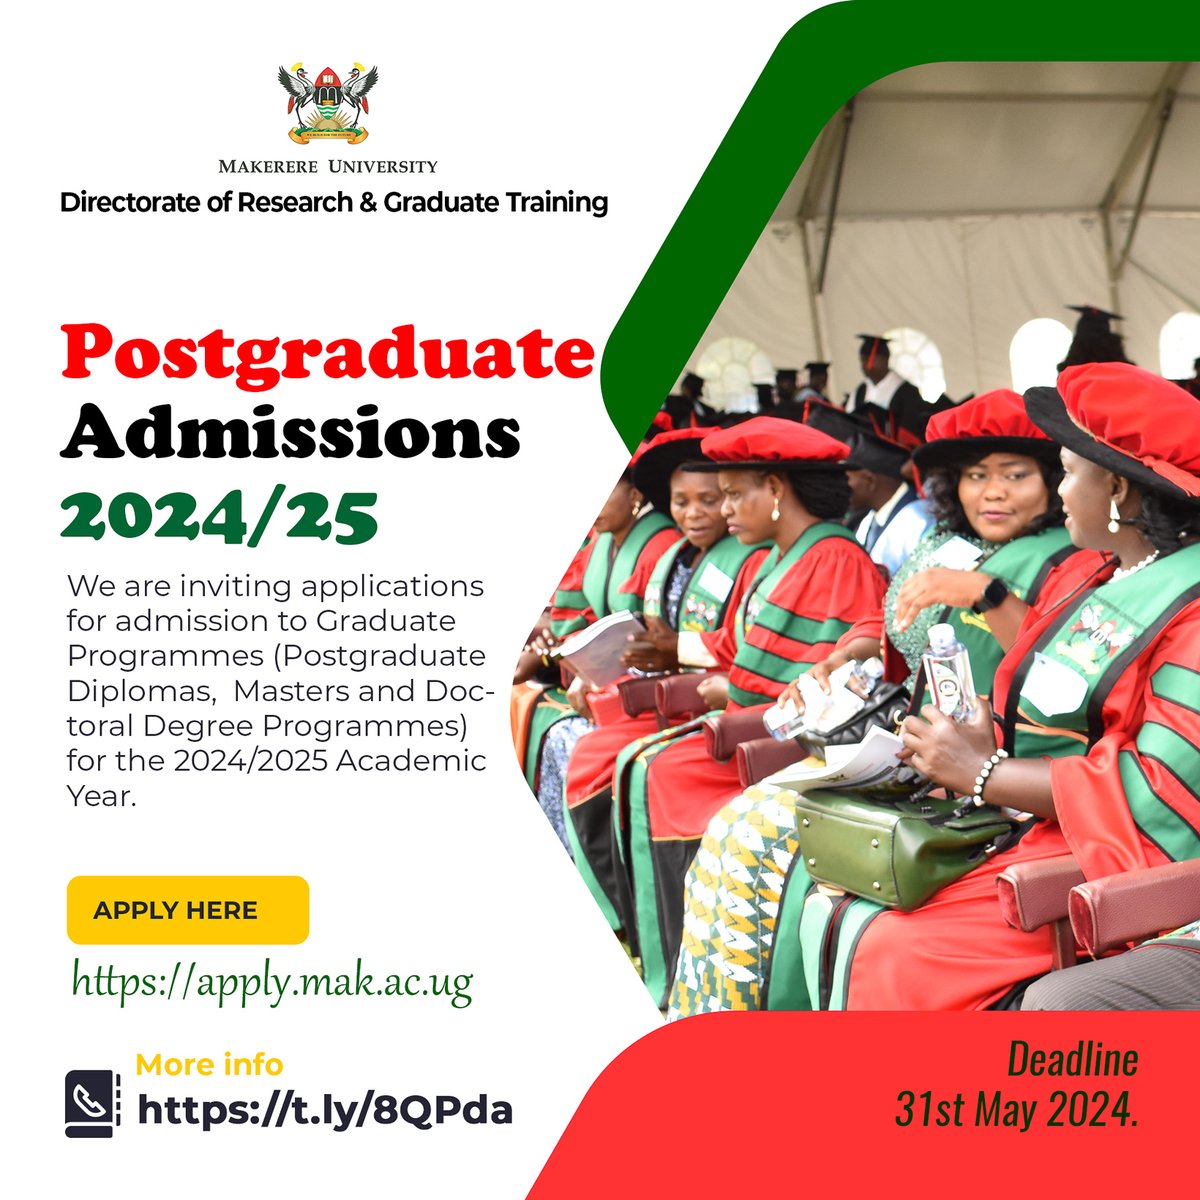 Calling applications for admission to @Makerere postgraduate programmes for 2024/2025 Academic Year. Deadline: Friday May 31, 2024. Details: t.ly/8QPda